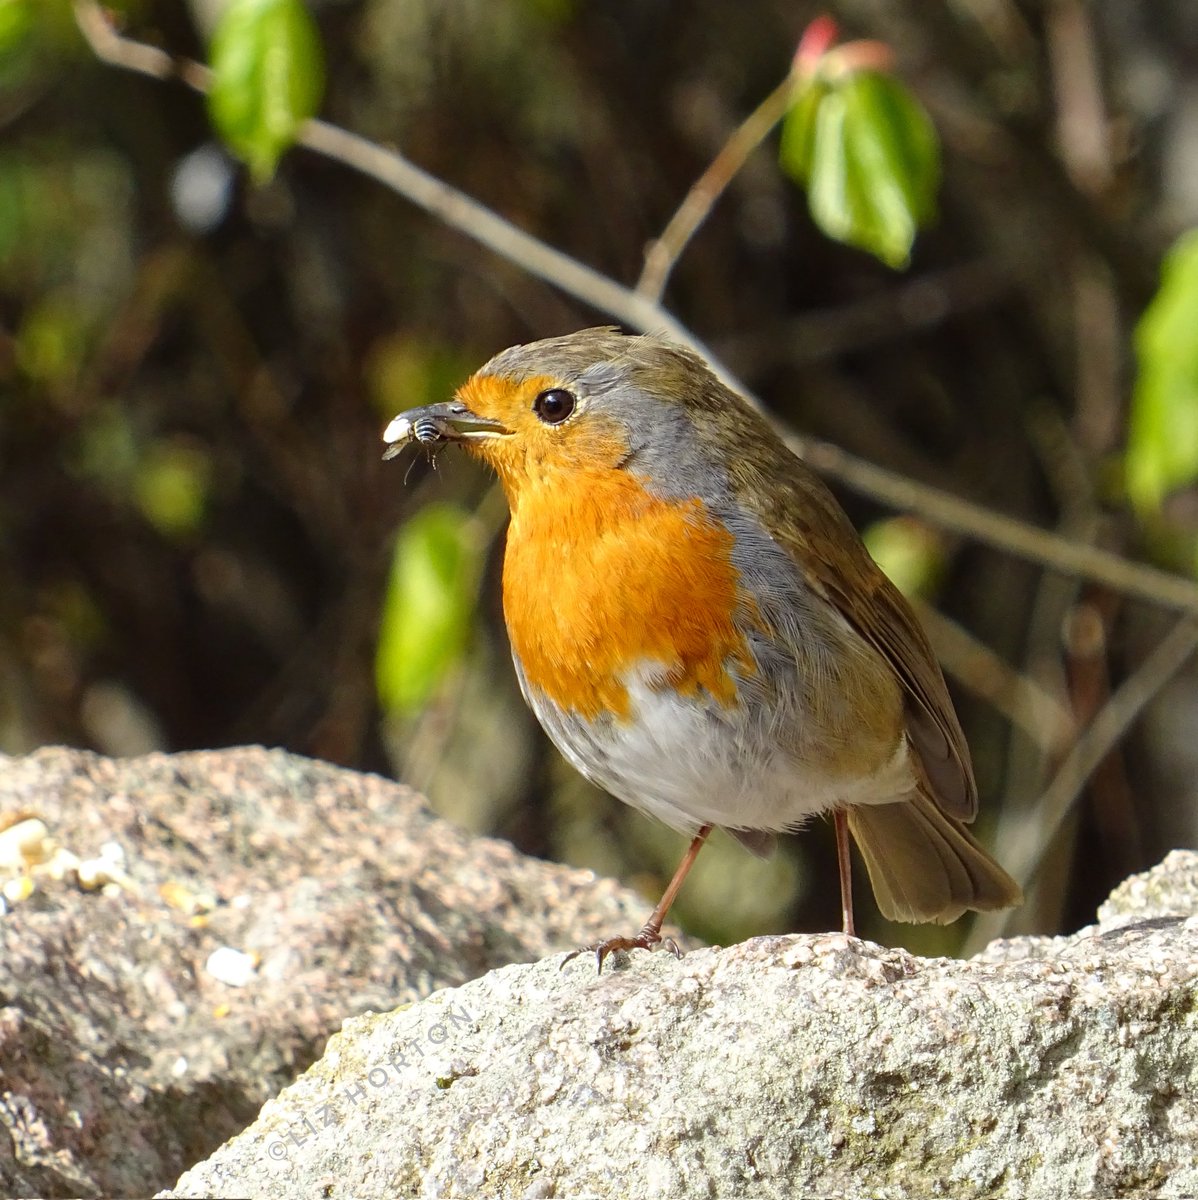 Gentle, sweet #Robin..
'Nothing is so strong as gentleness, nothing so gentle as real strength.'
Goethe #quote
#thoughtoftheday
Hope your day is tranquil..🙂
#nature #wildlife #birds #photograghy
#birdwatching #birdphotography
#BirdTwitter #birdtonic 
#art #naturelovers .. 🌱🧡🕊